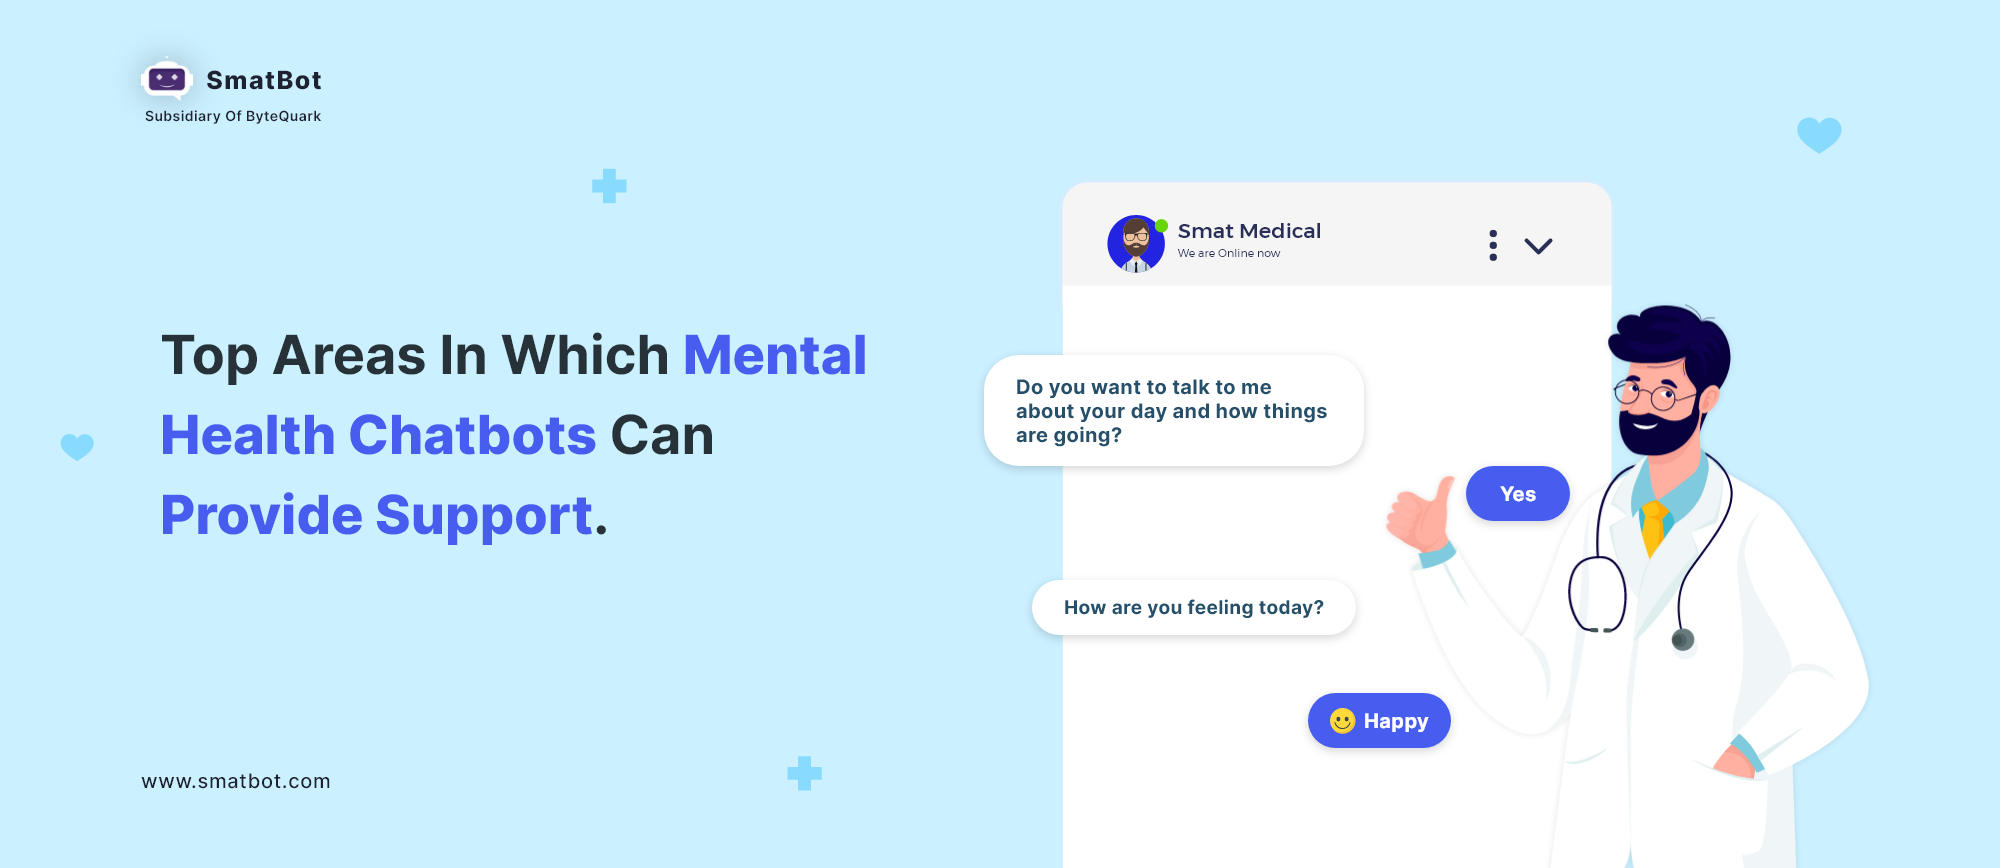 key support areas for mental health chatbots